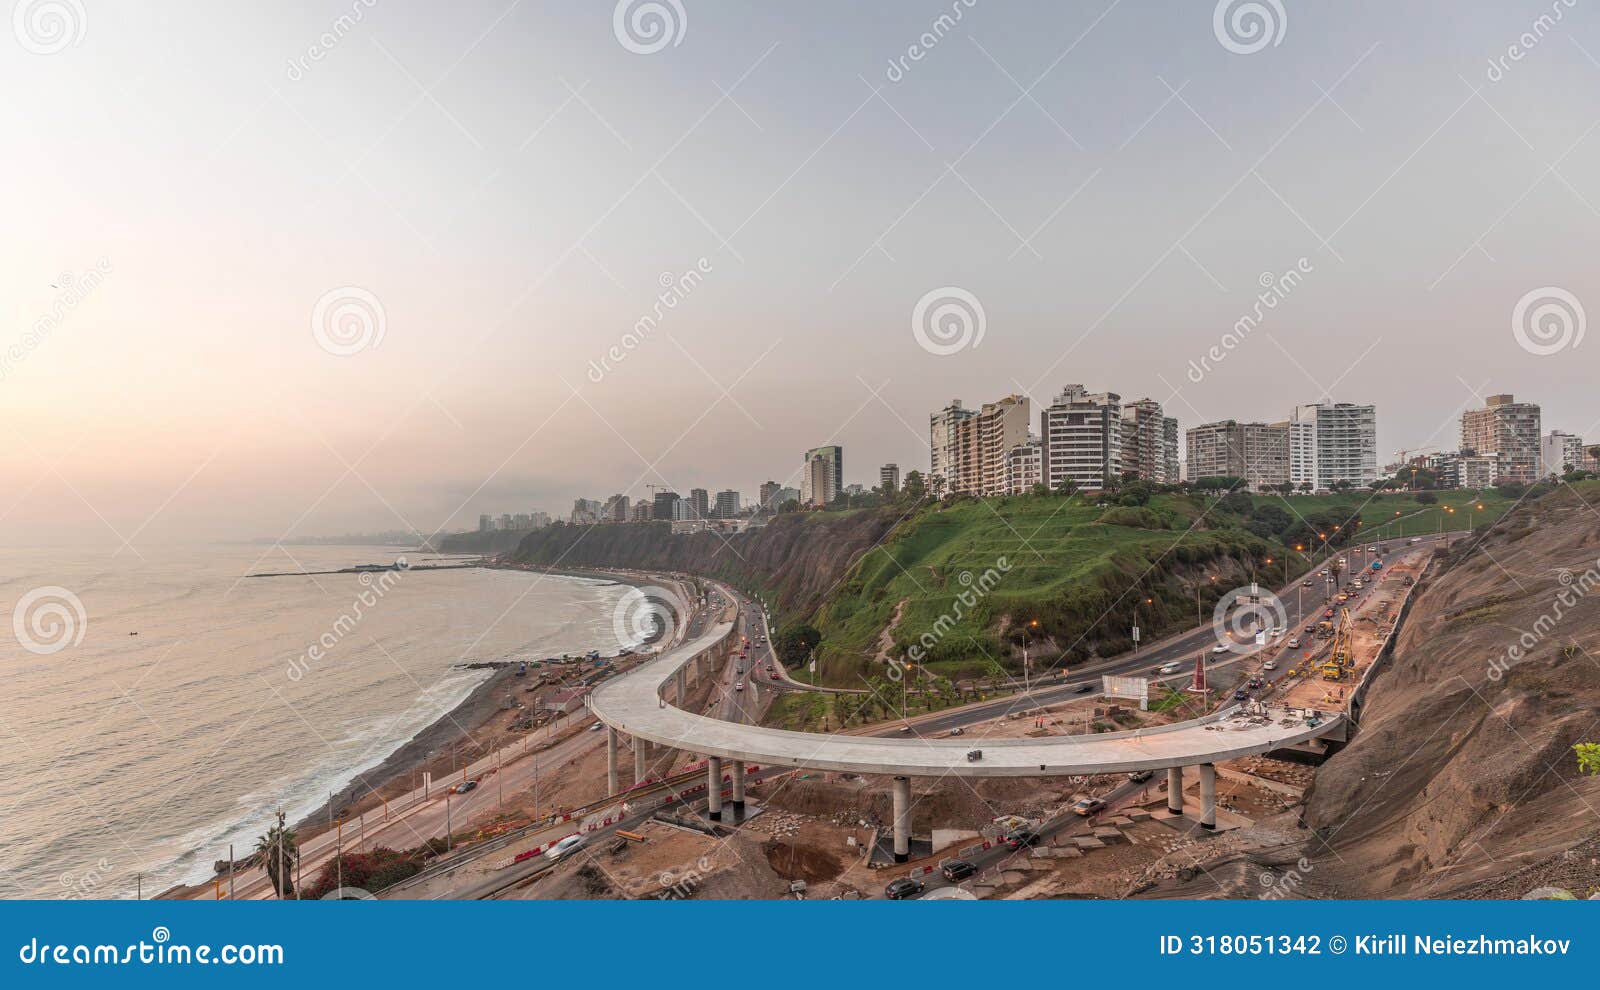 aerial view of lima's coastline in the neighborhood of miraflores day to night timelapse, lima, peru